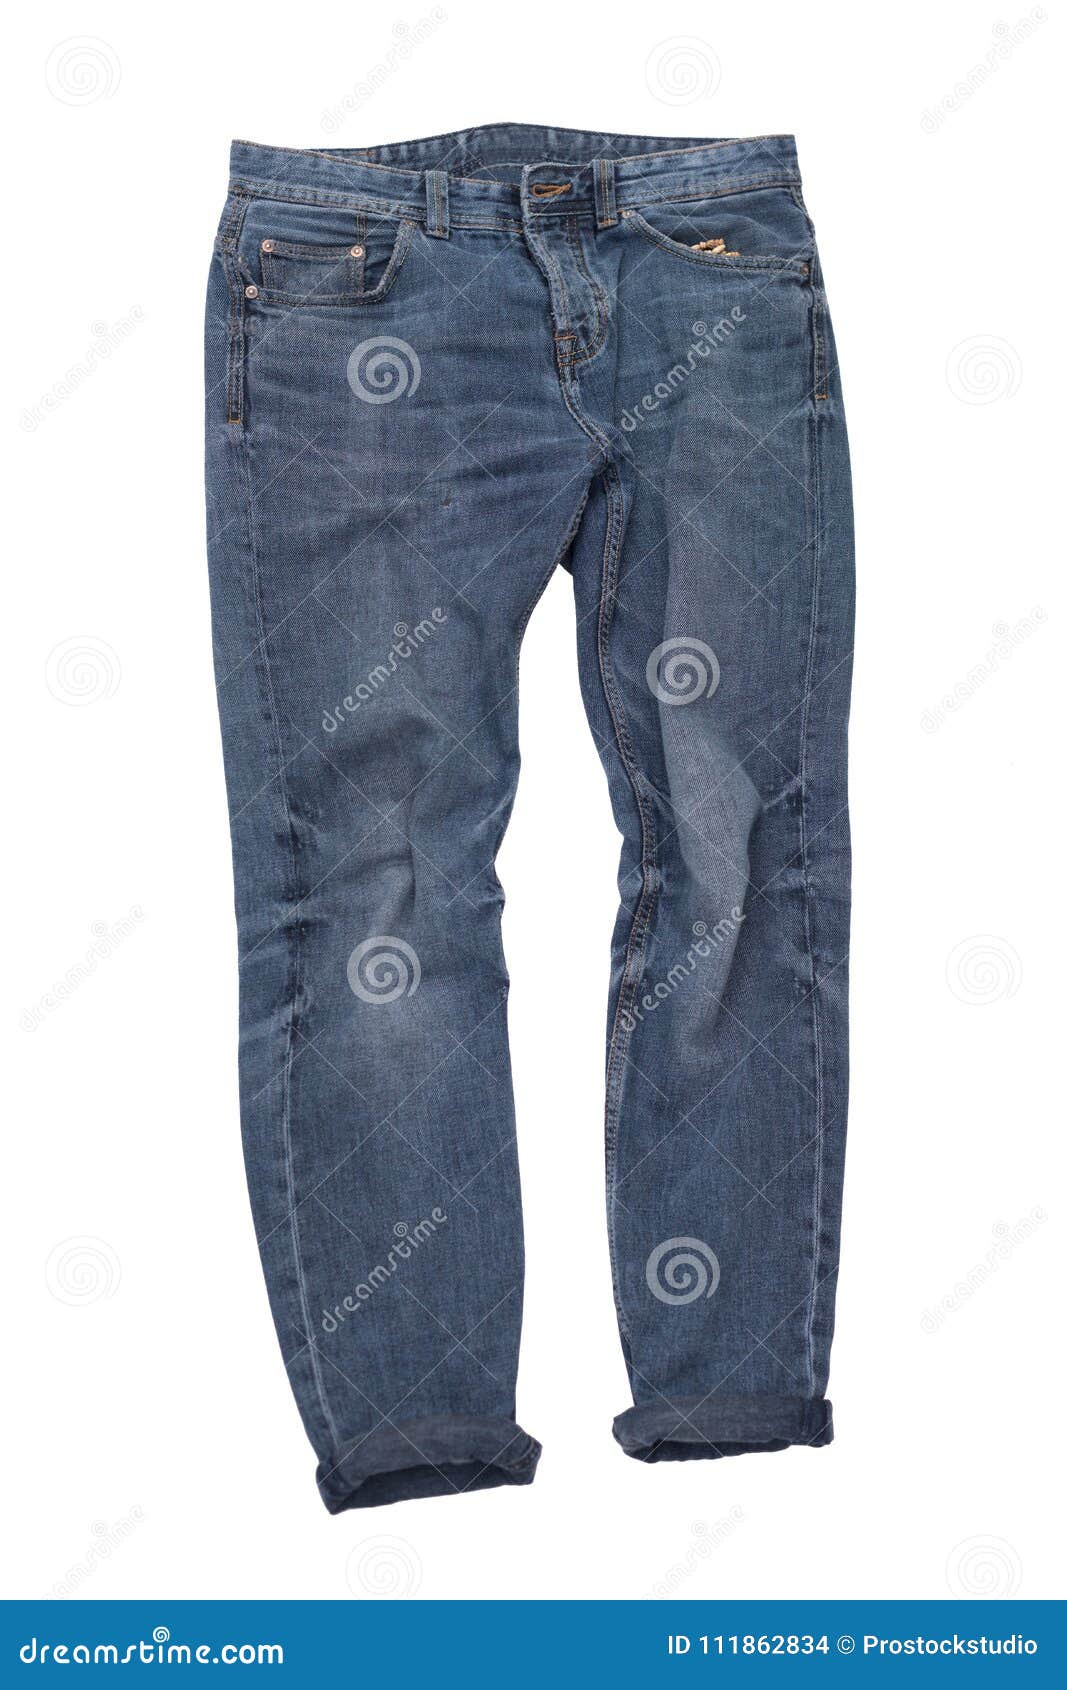 Casual Jeans Pants Isolated on White Background Stock Photo - Image of ...